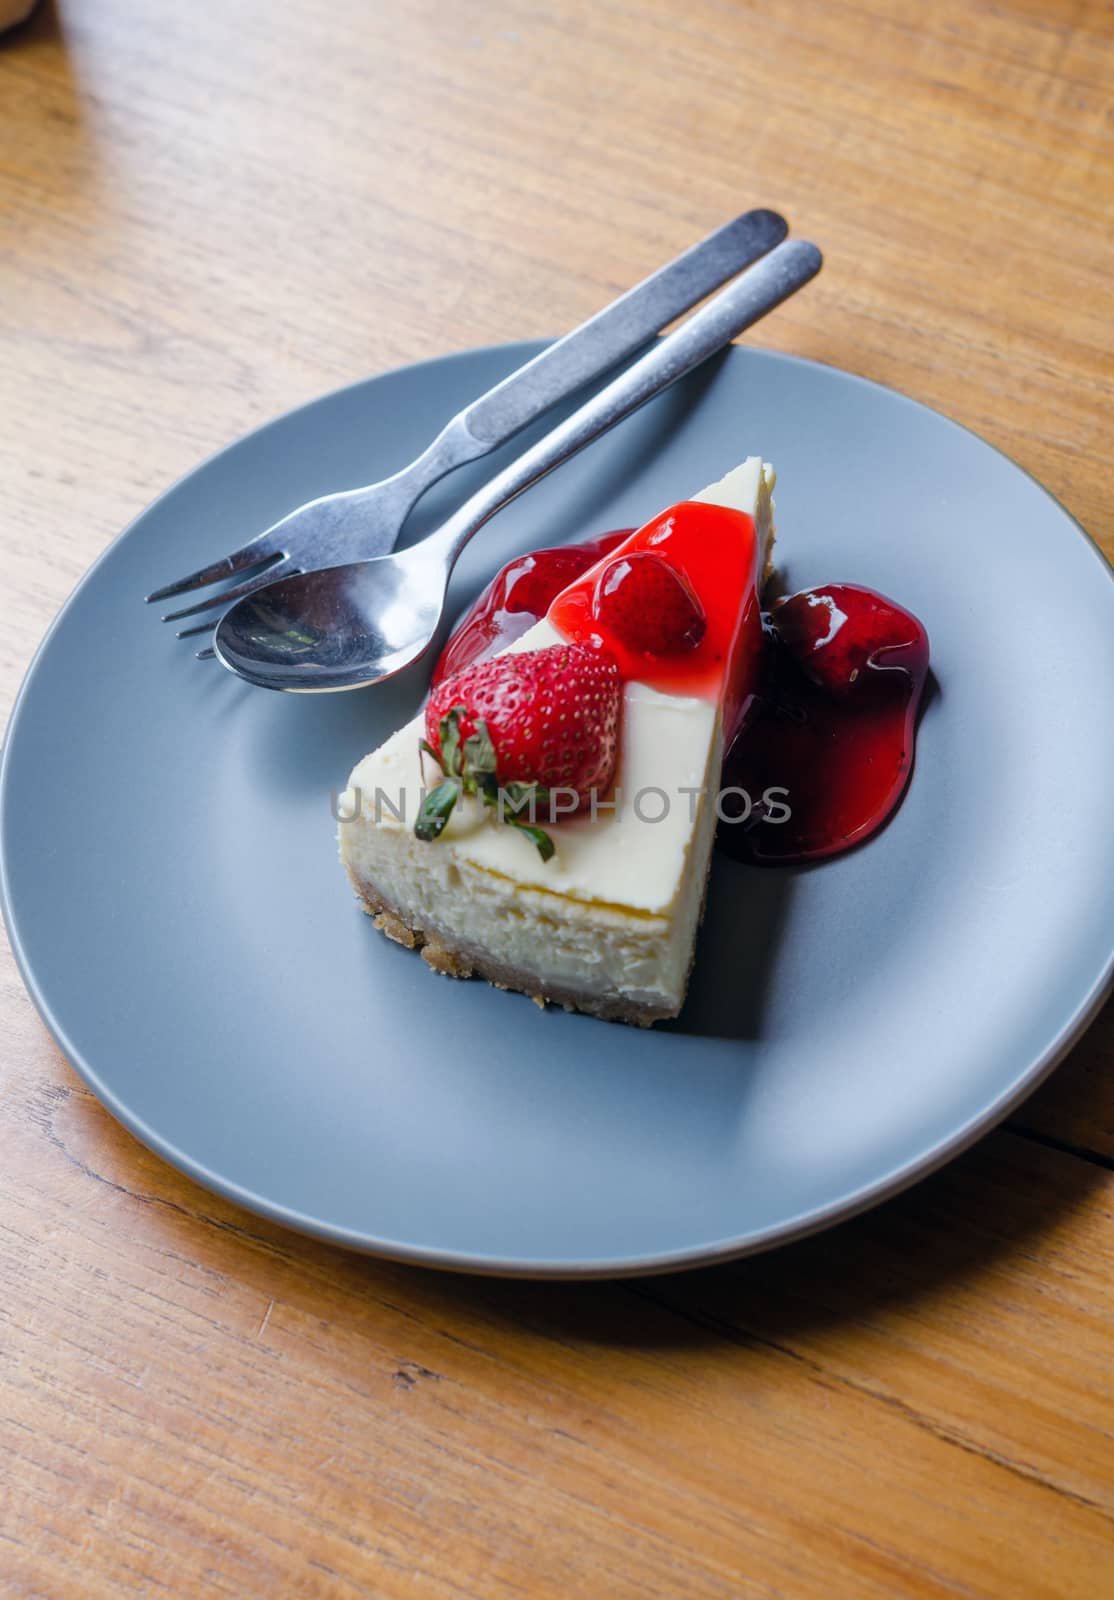 Top view of Strawberry Cheesecake with spoon and fork on wooden table